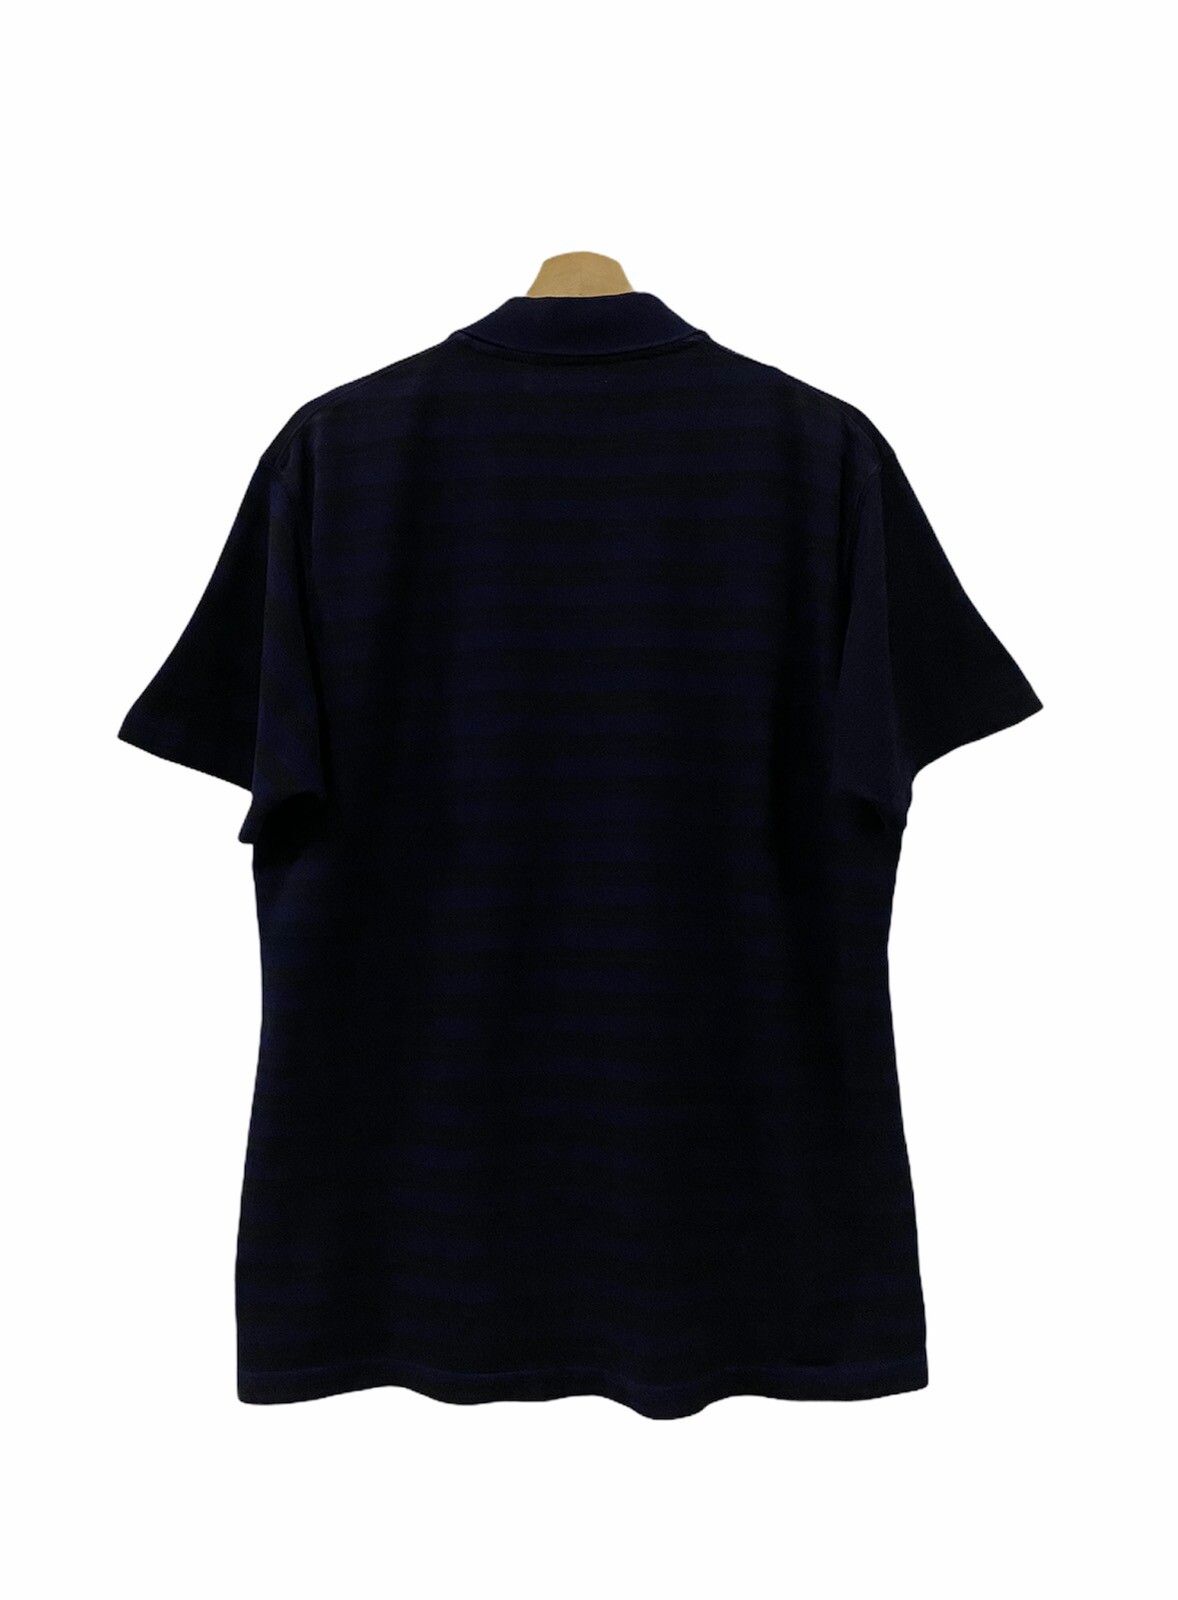 Rare Enginereed Garment Uniqlo Reconstructed Striped Pocket - 4